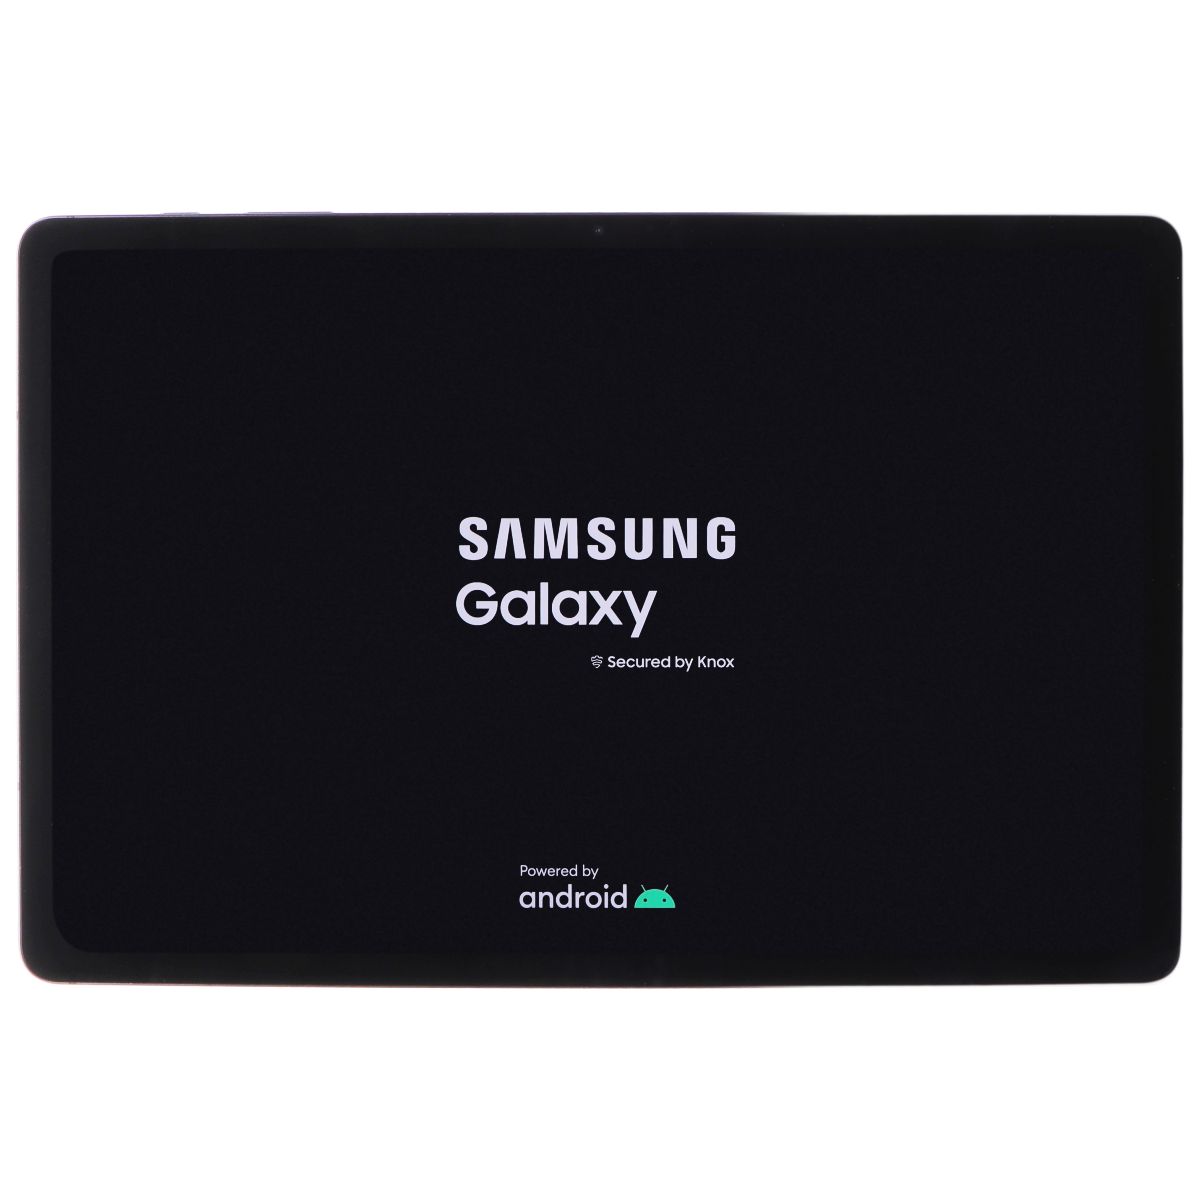 Samsung Galaxy Tab S7 FE (SM-T733) 12.4-in WiFi Only 64GB - Mystic Black iPads, Tablets & eBook Readers Samsung    - Simple Cell Bulk Wholesale Pricing - USA Seller